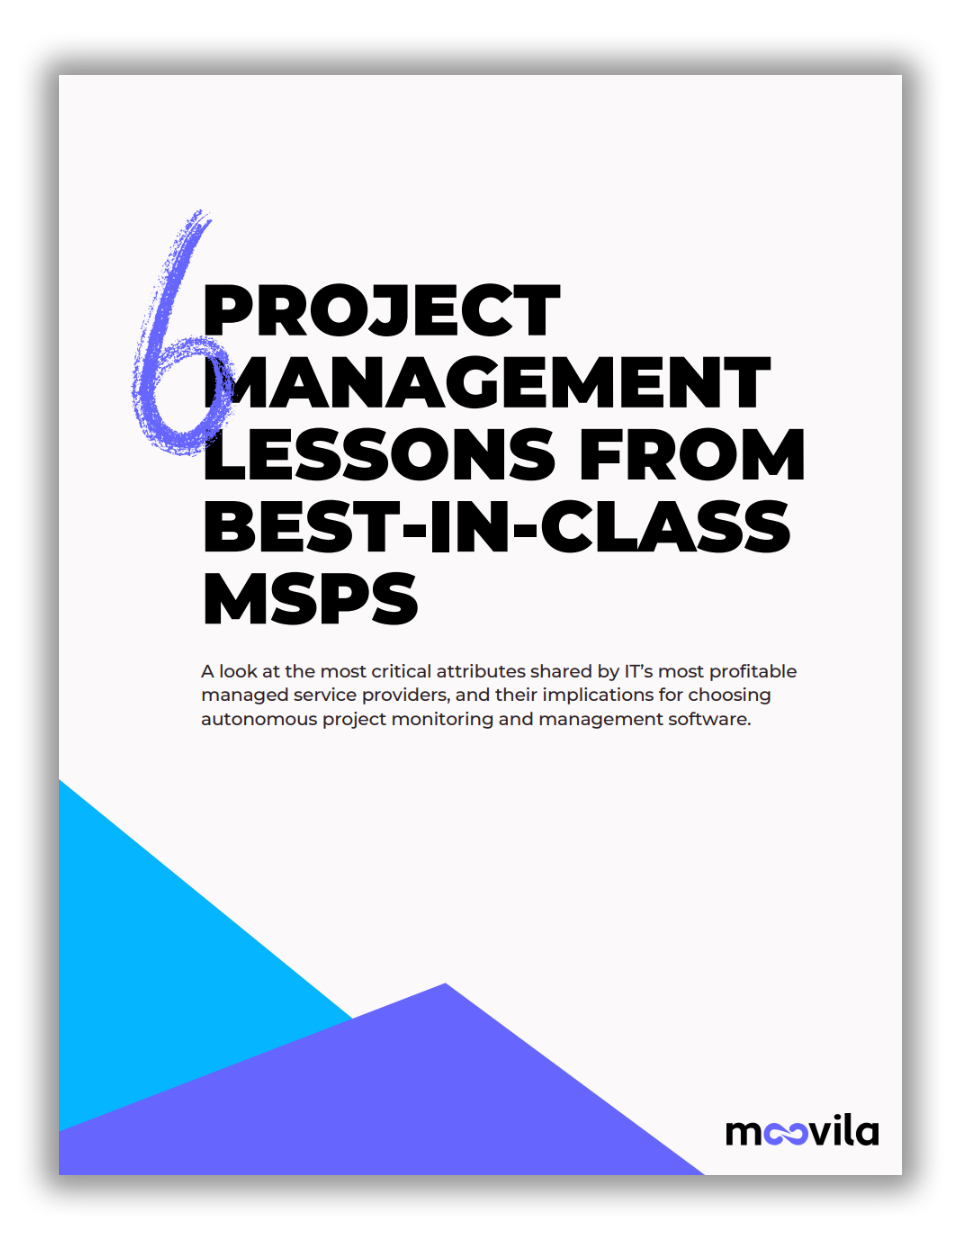 6 Project Management Lessons from Best-in-Class MSPs